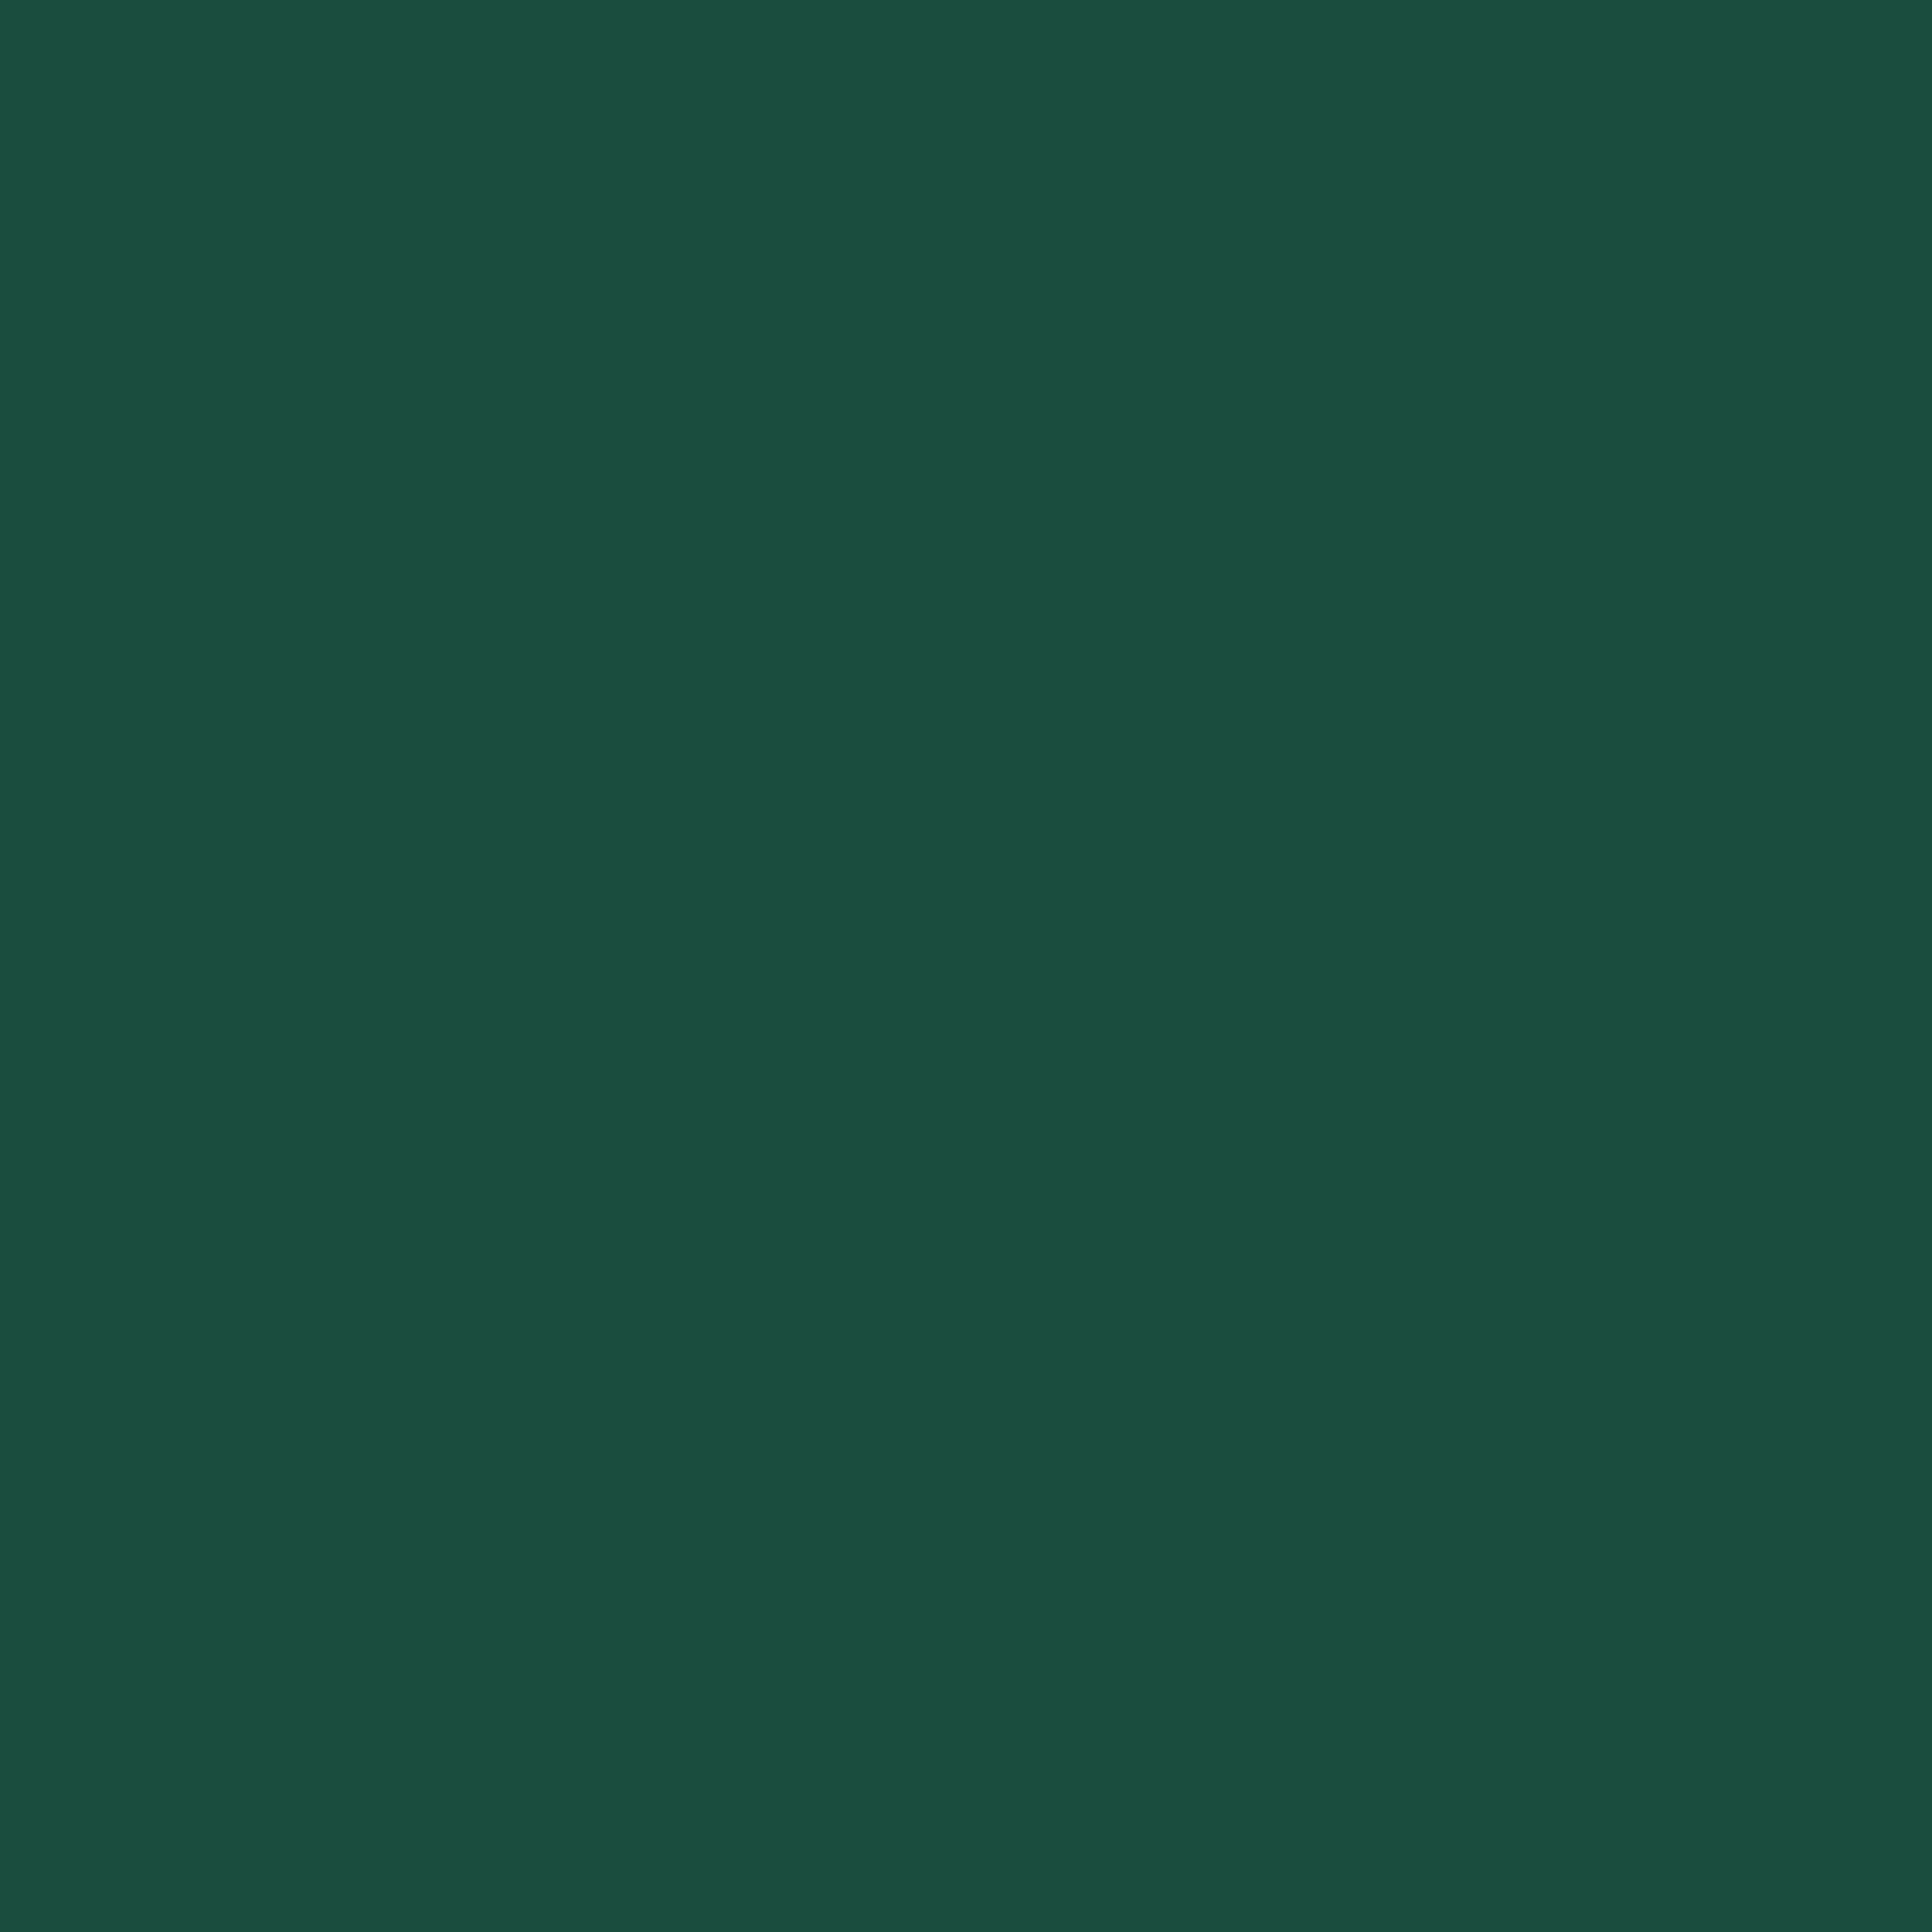 2732x2732 Brunswick Green Solid Color Background